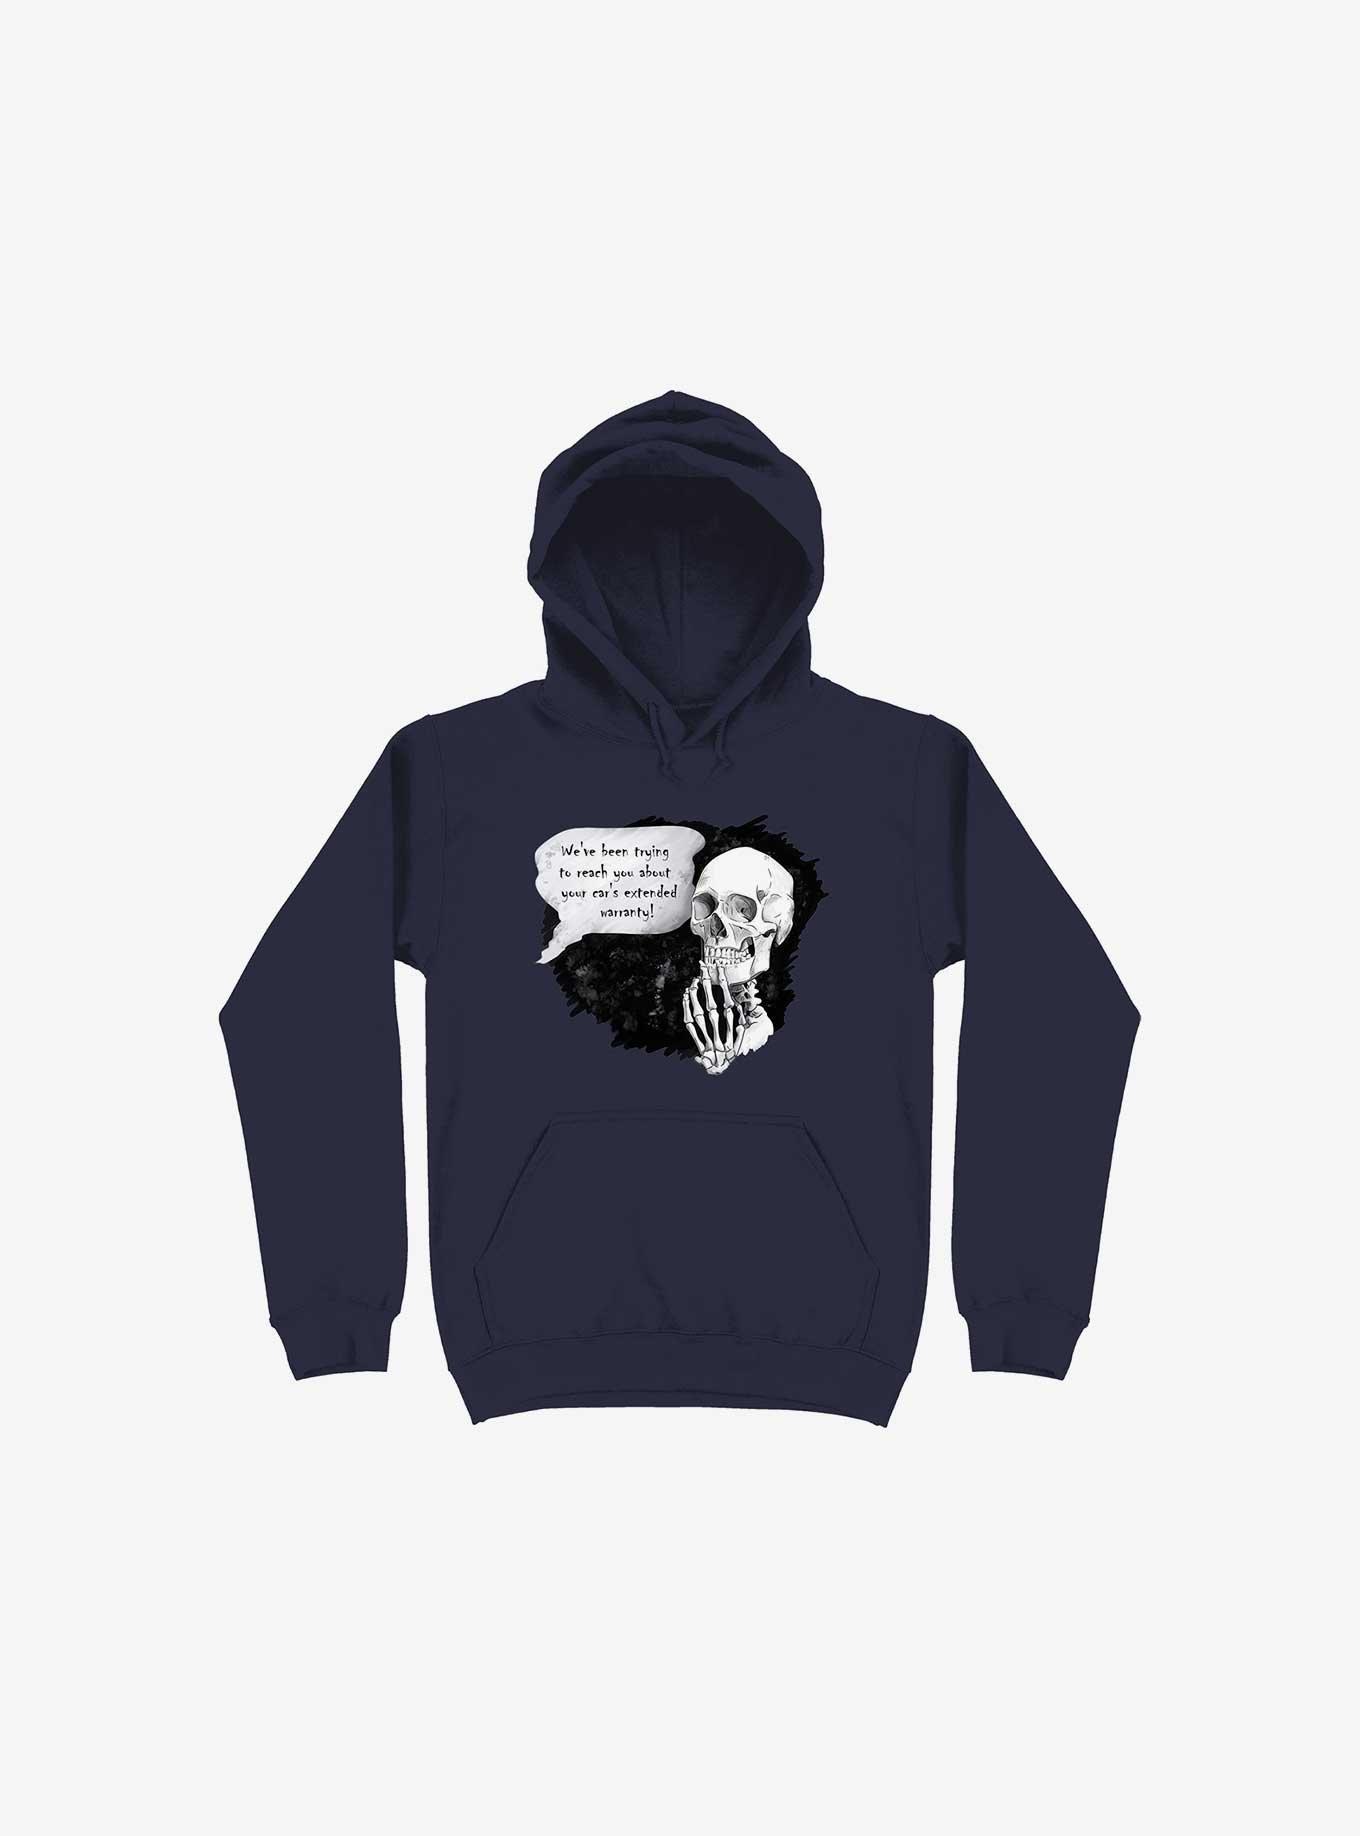 We've Been Trying To Reach You... Hoodie, NAVY, hi-res